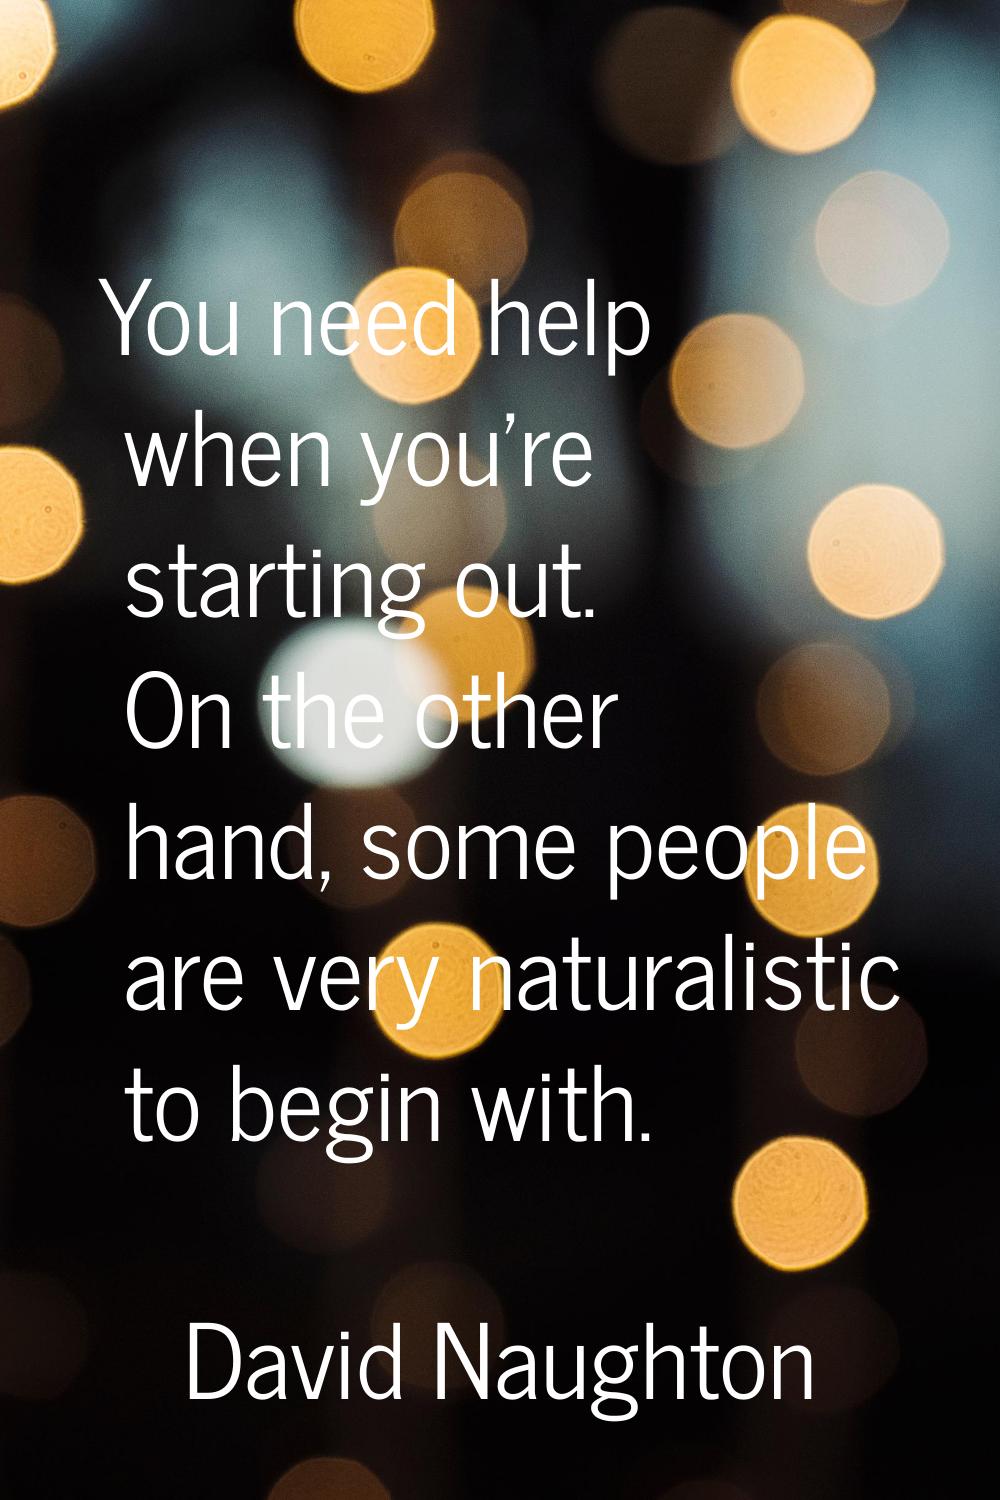 You need help when you're starting out. On the other hand, some people are very naturalistic to beg